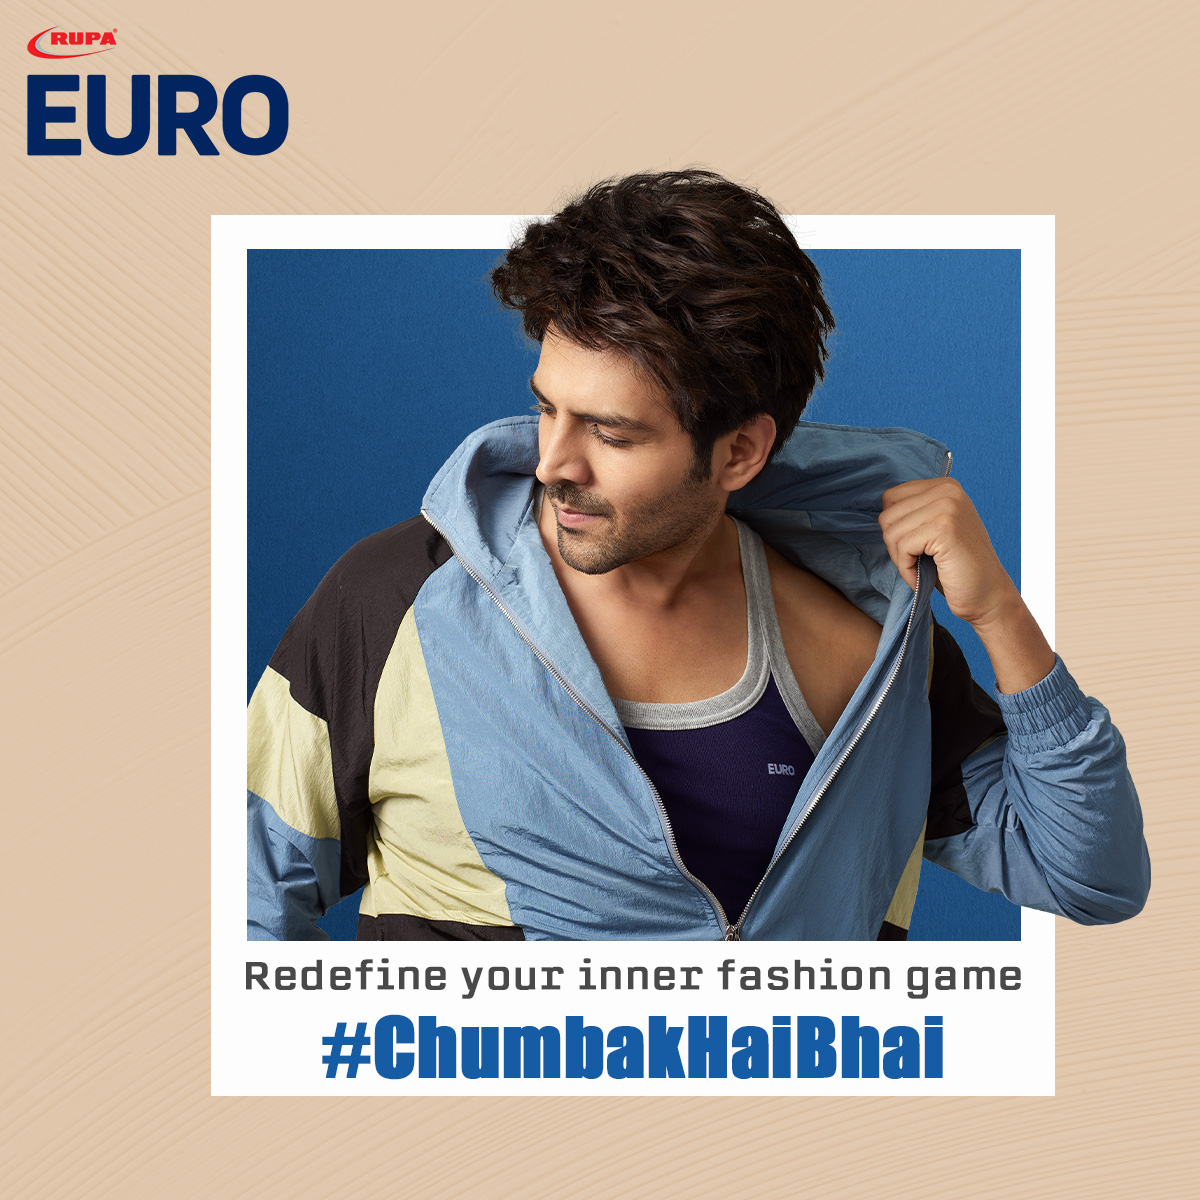 Complete your look with Euro's finishing touches – from sleek accessories to statement-making innerwear. It's the little details that make all the difference. #FinishingTouches #EuroFashionlnners #RupaEuro #Fashion #KartikAaryan #ChumbakHaiBhai